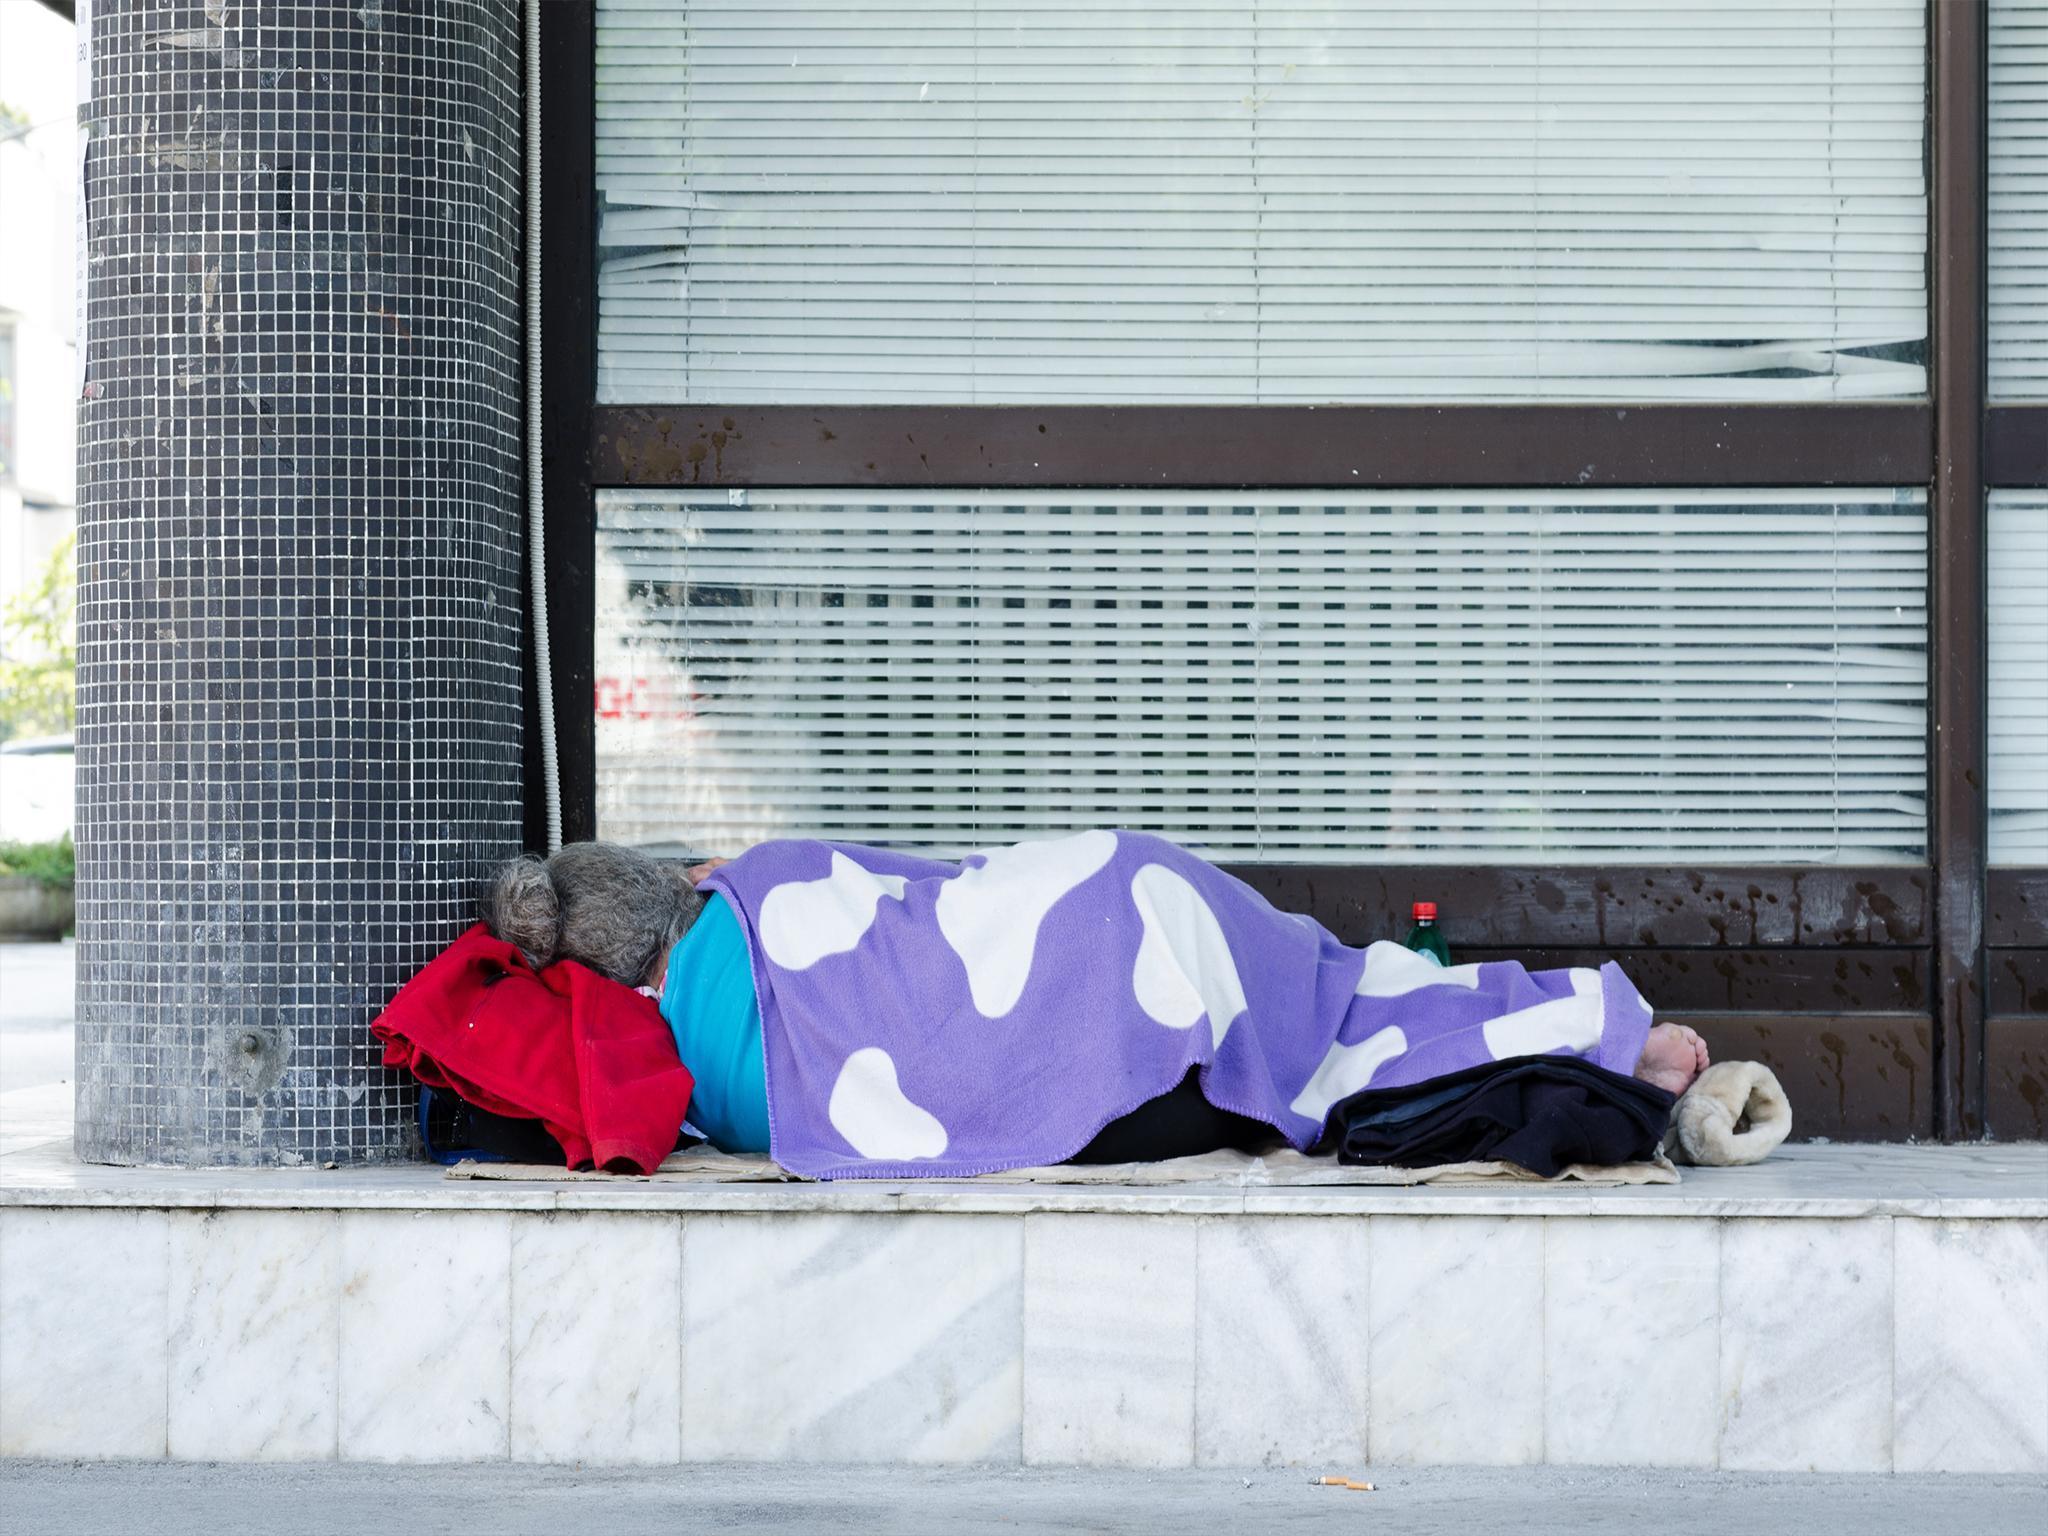 Official government data shows that on any given night in autumn last year, 4,751 people were recorded sleeping on the streets, a figure that has more than doubled since 2010